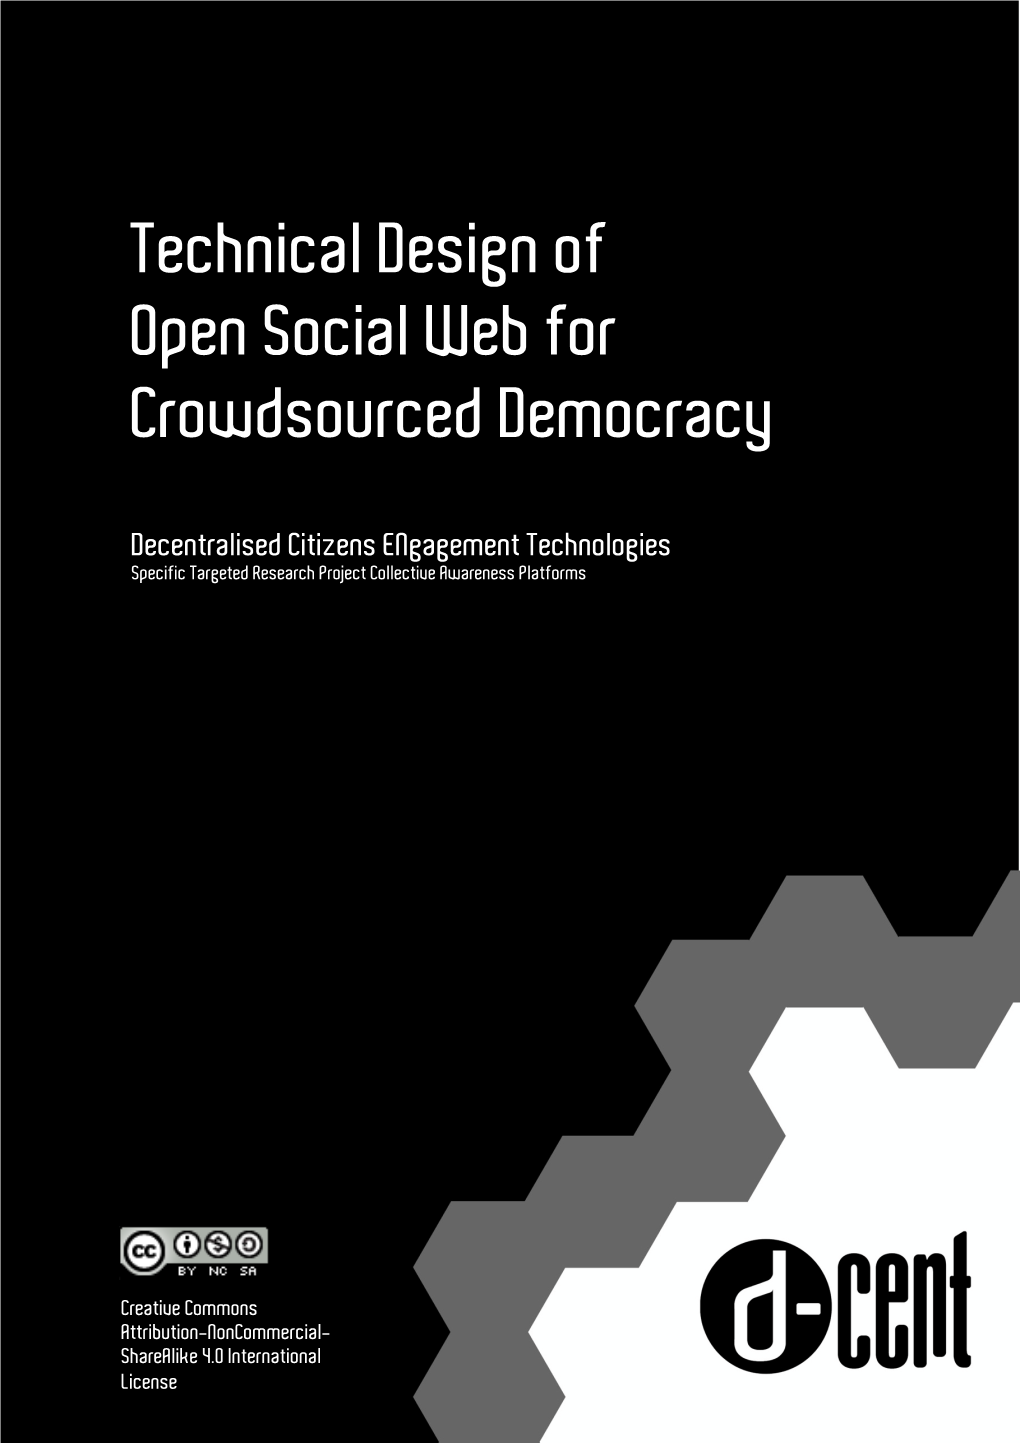 Technical Design of Open Social Web for Crowdsourced Democracy